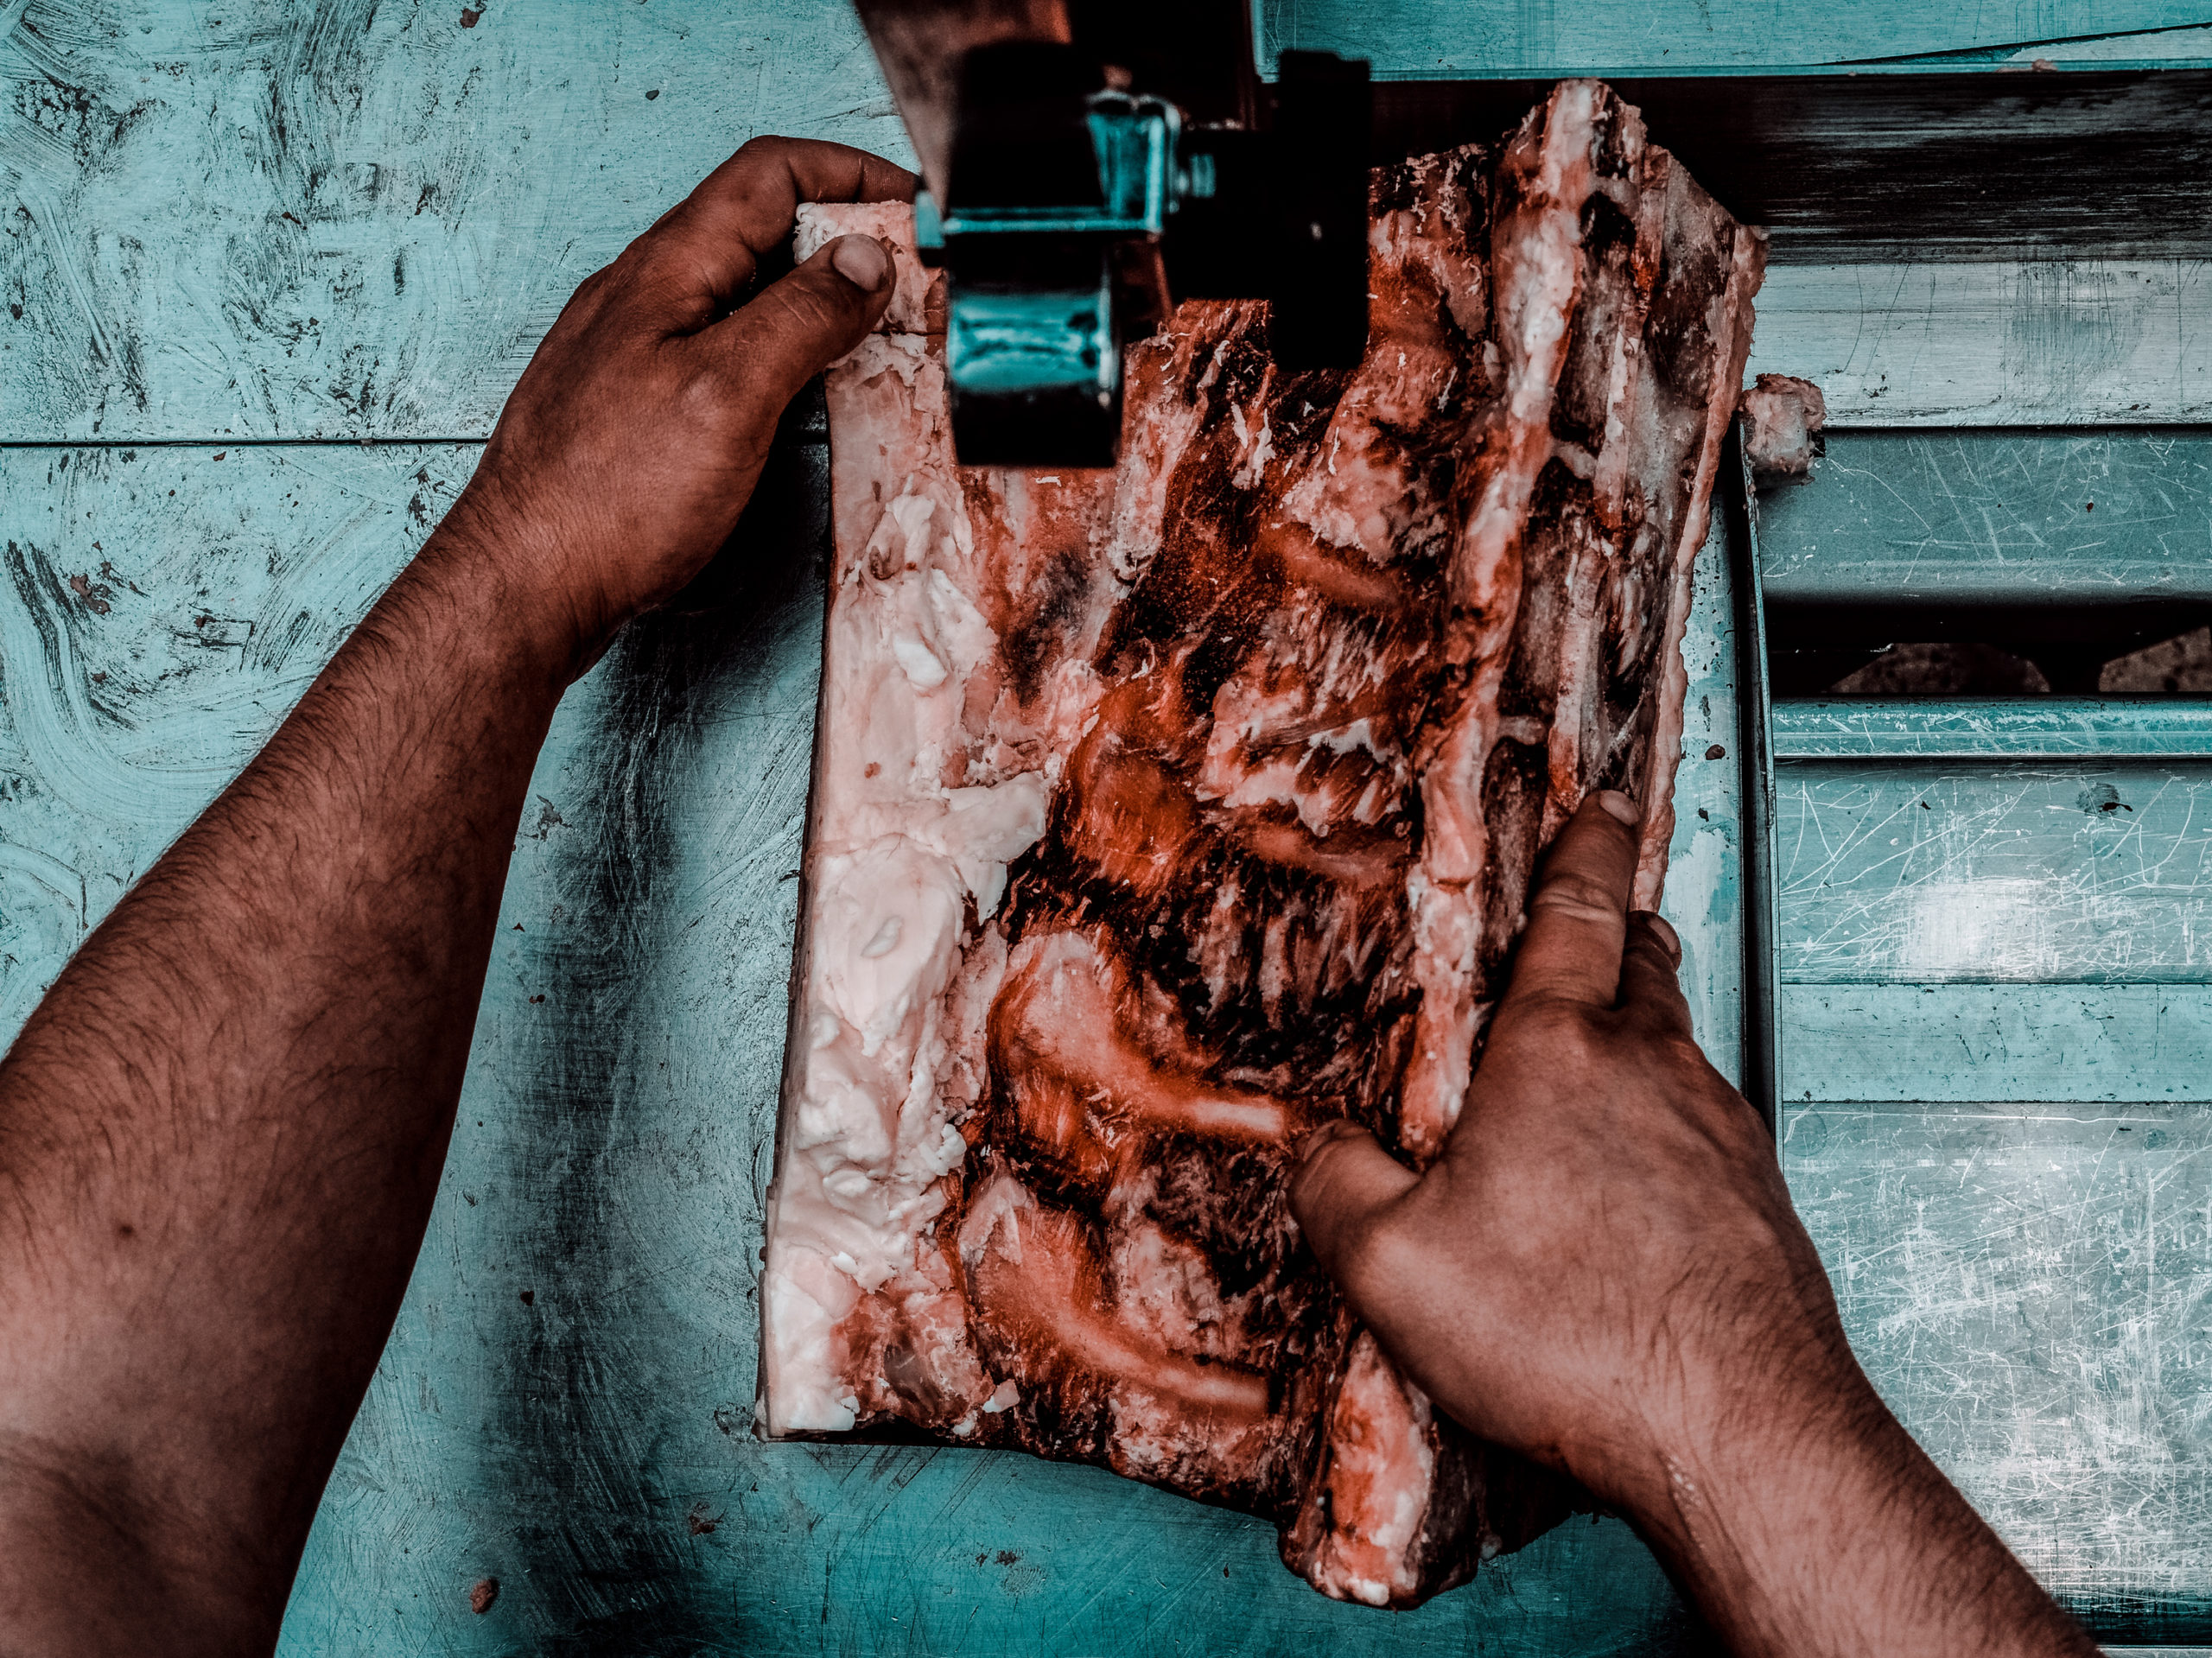 A butcher using a machine to saw through meat